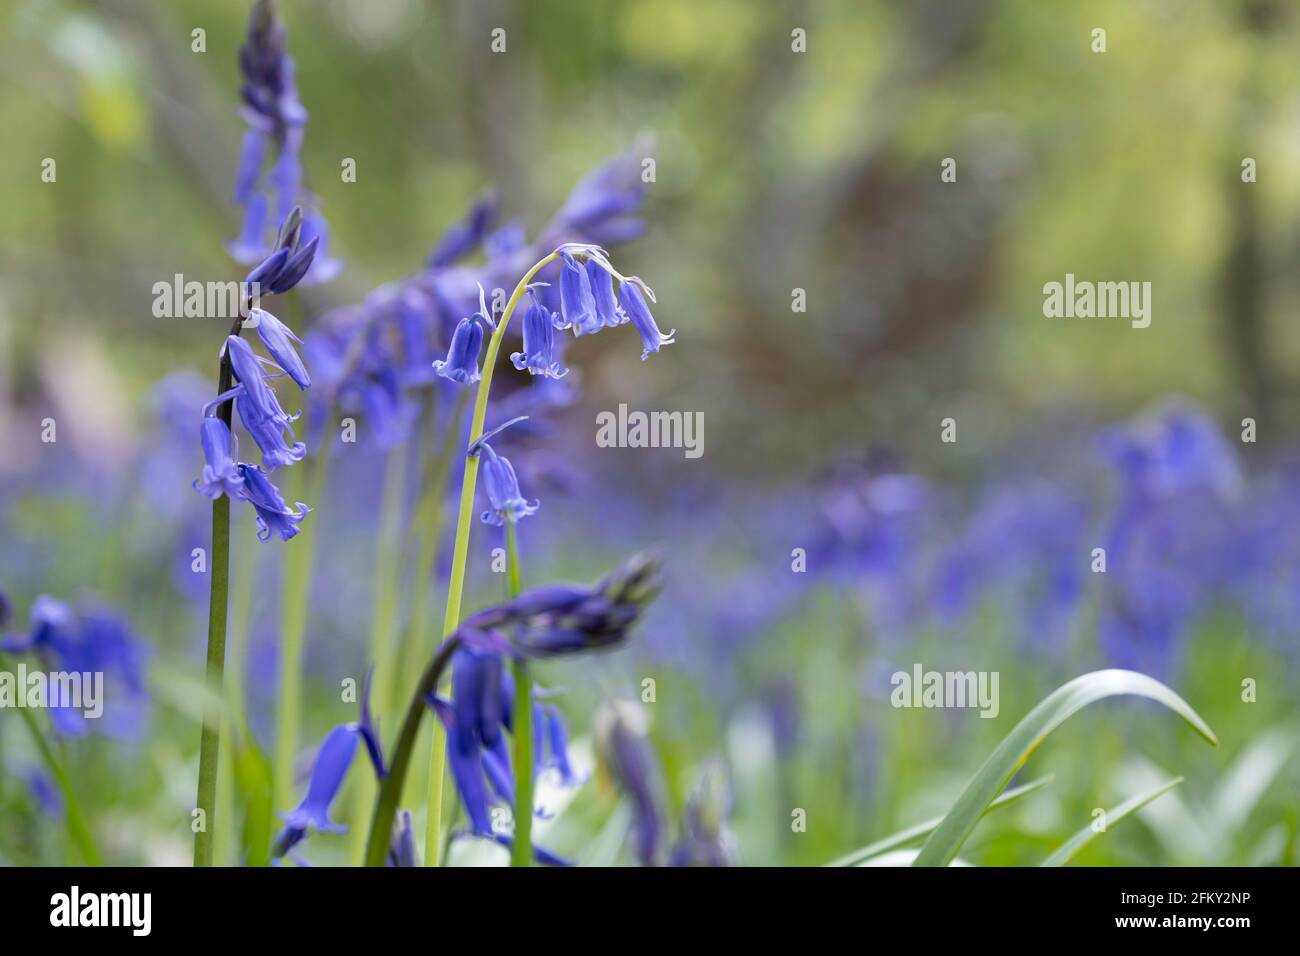 bluebells in spring, Danbury, Essex, England, United Kingdom. Close up with blurred background of woodland ecology in its natural environment Stock Photo